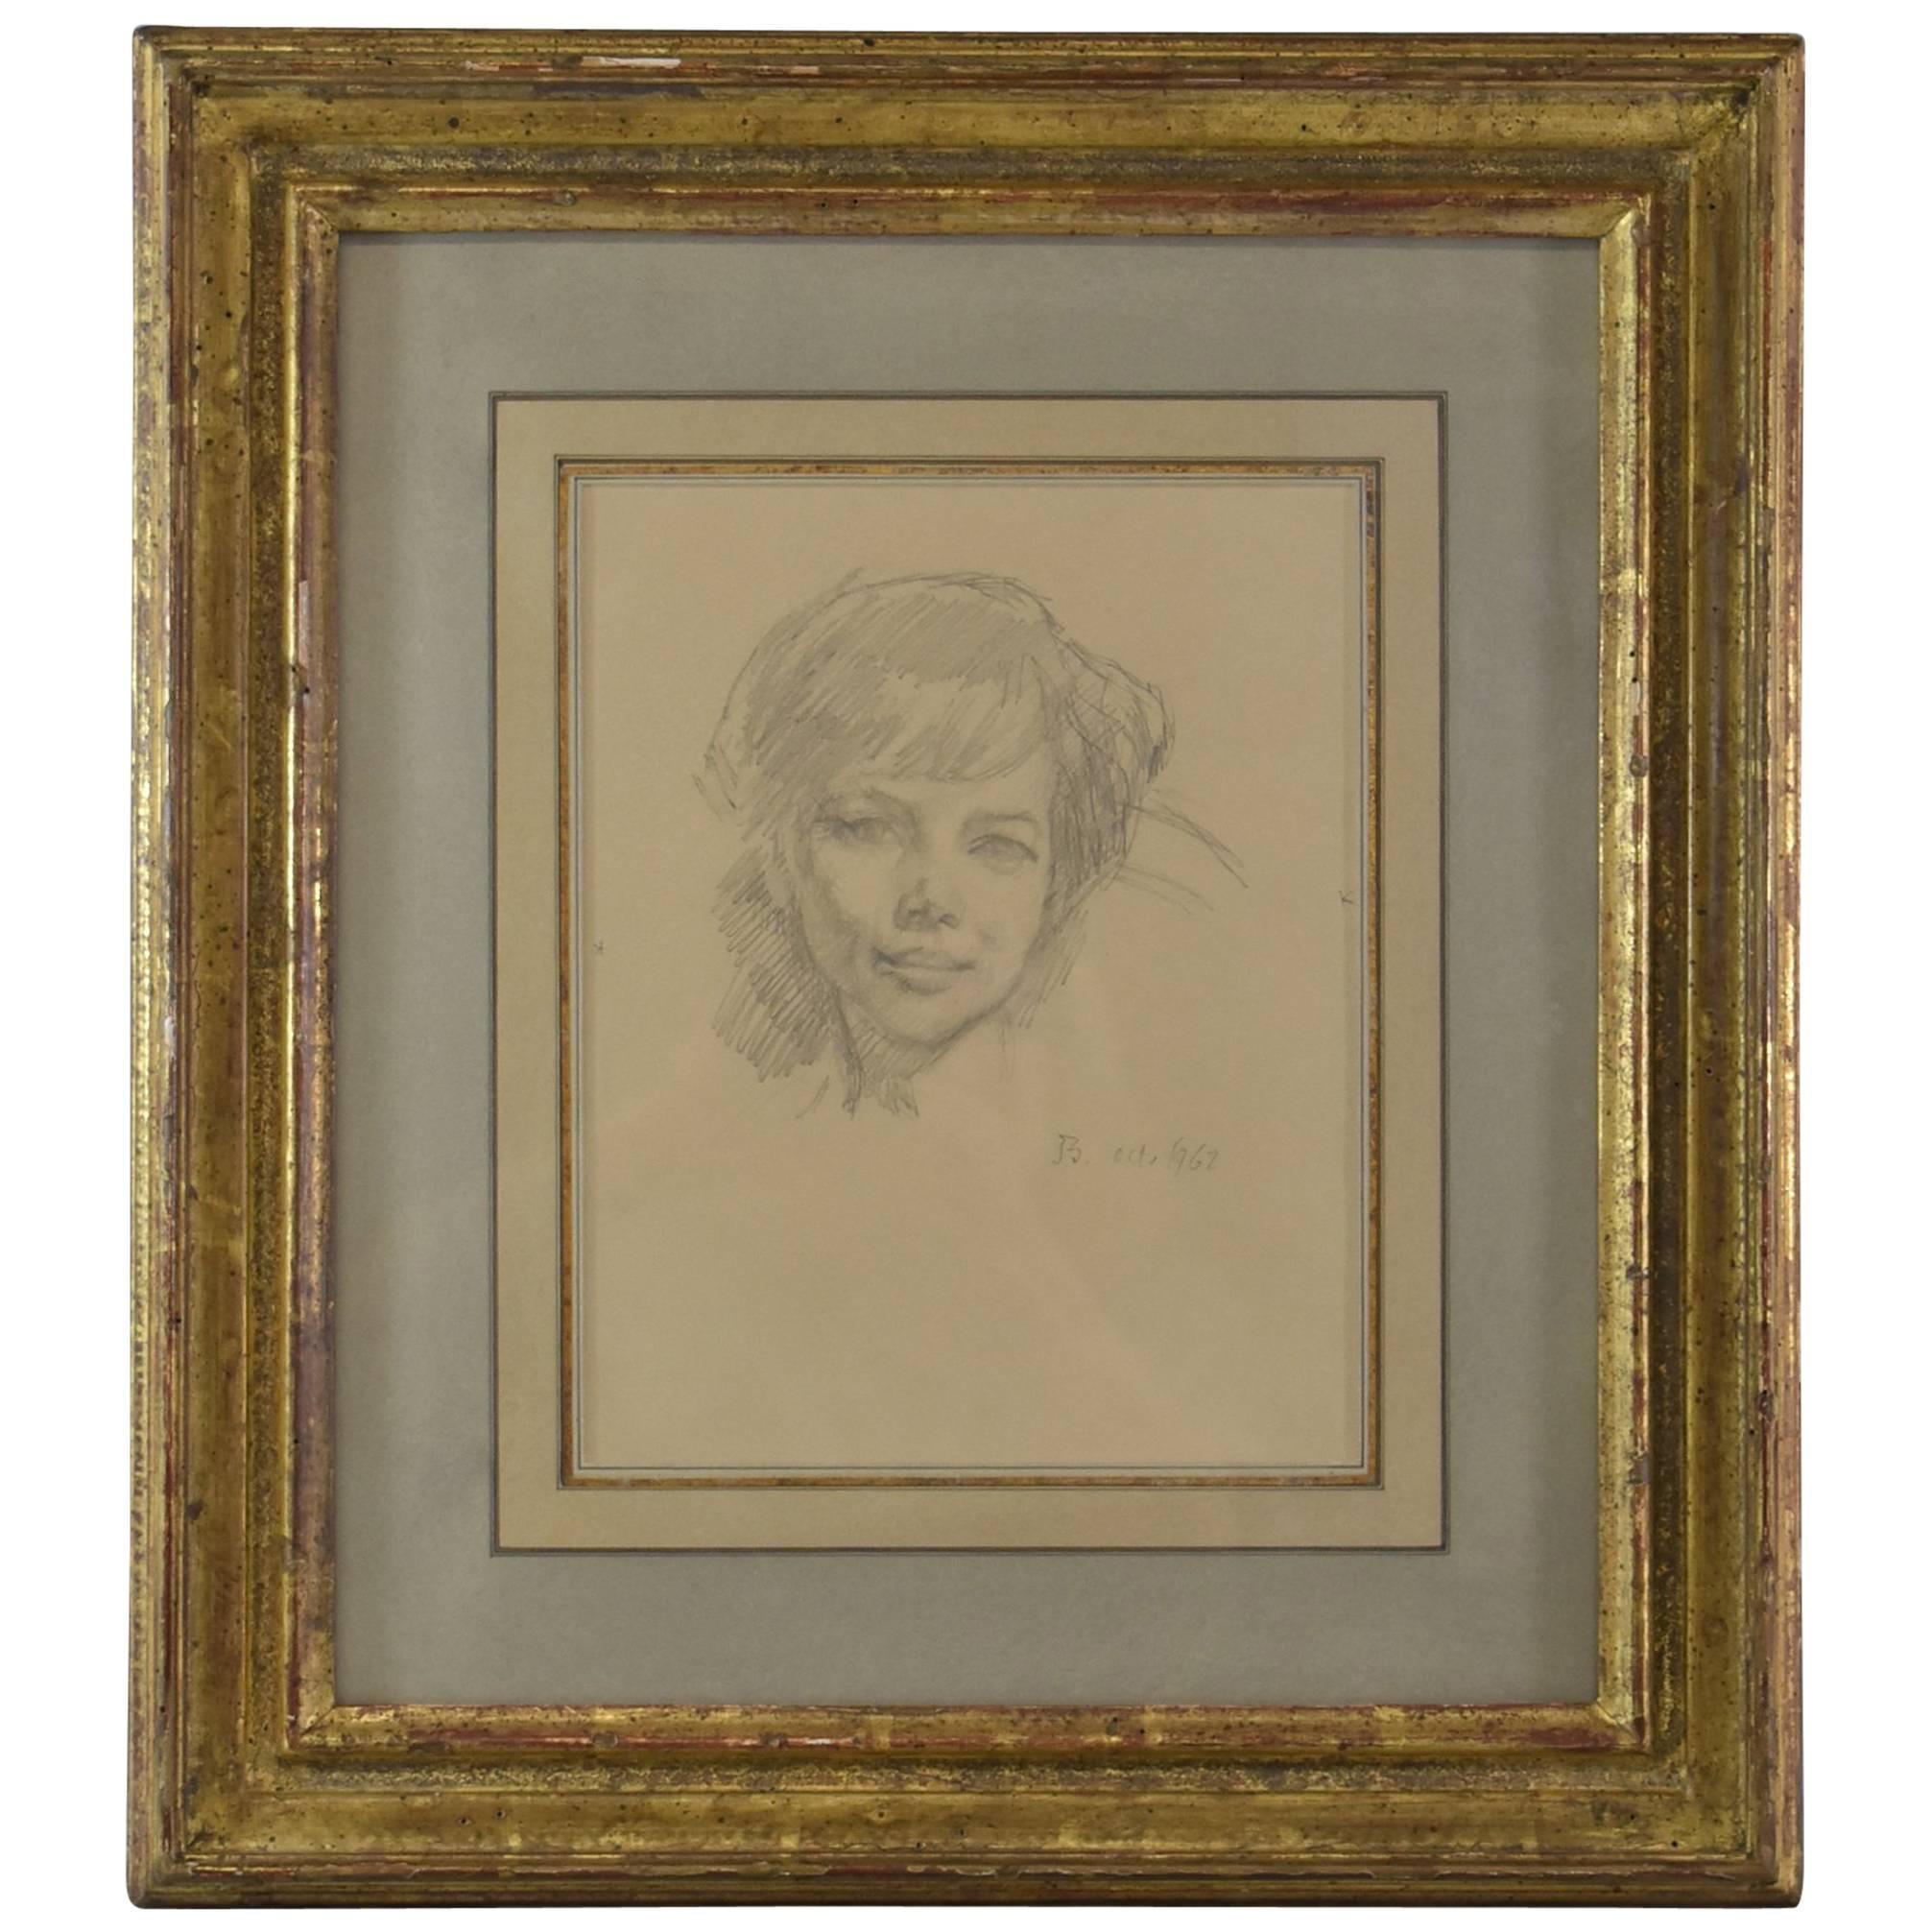 "Portrait of A.R." (Alice Rewald) by Balthus Charcoal and Pencil, 1962